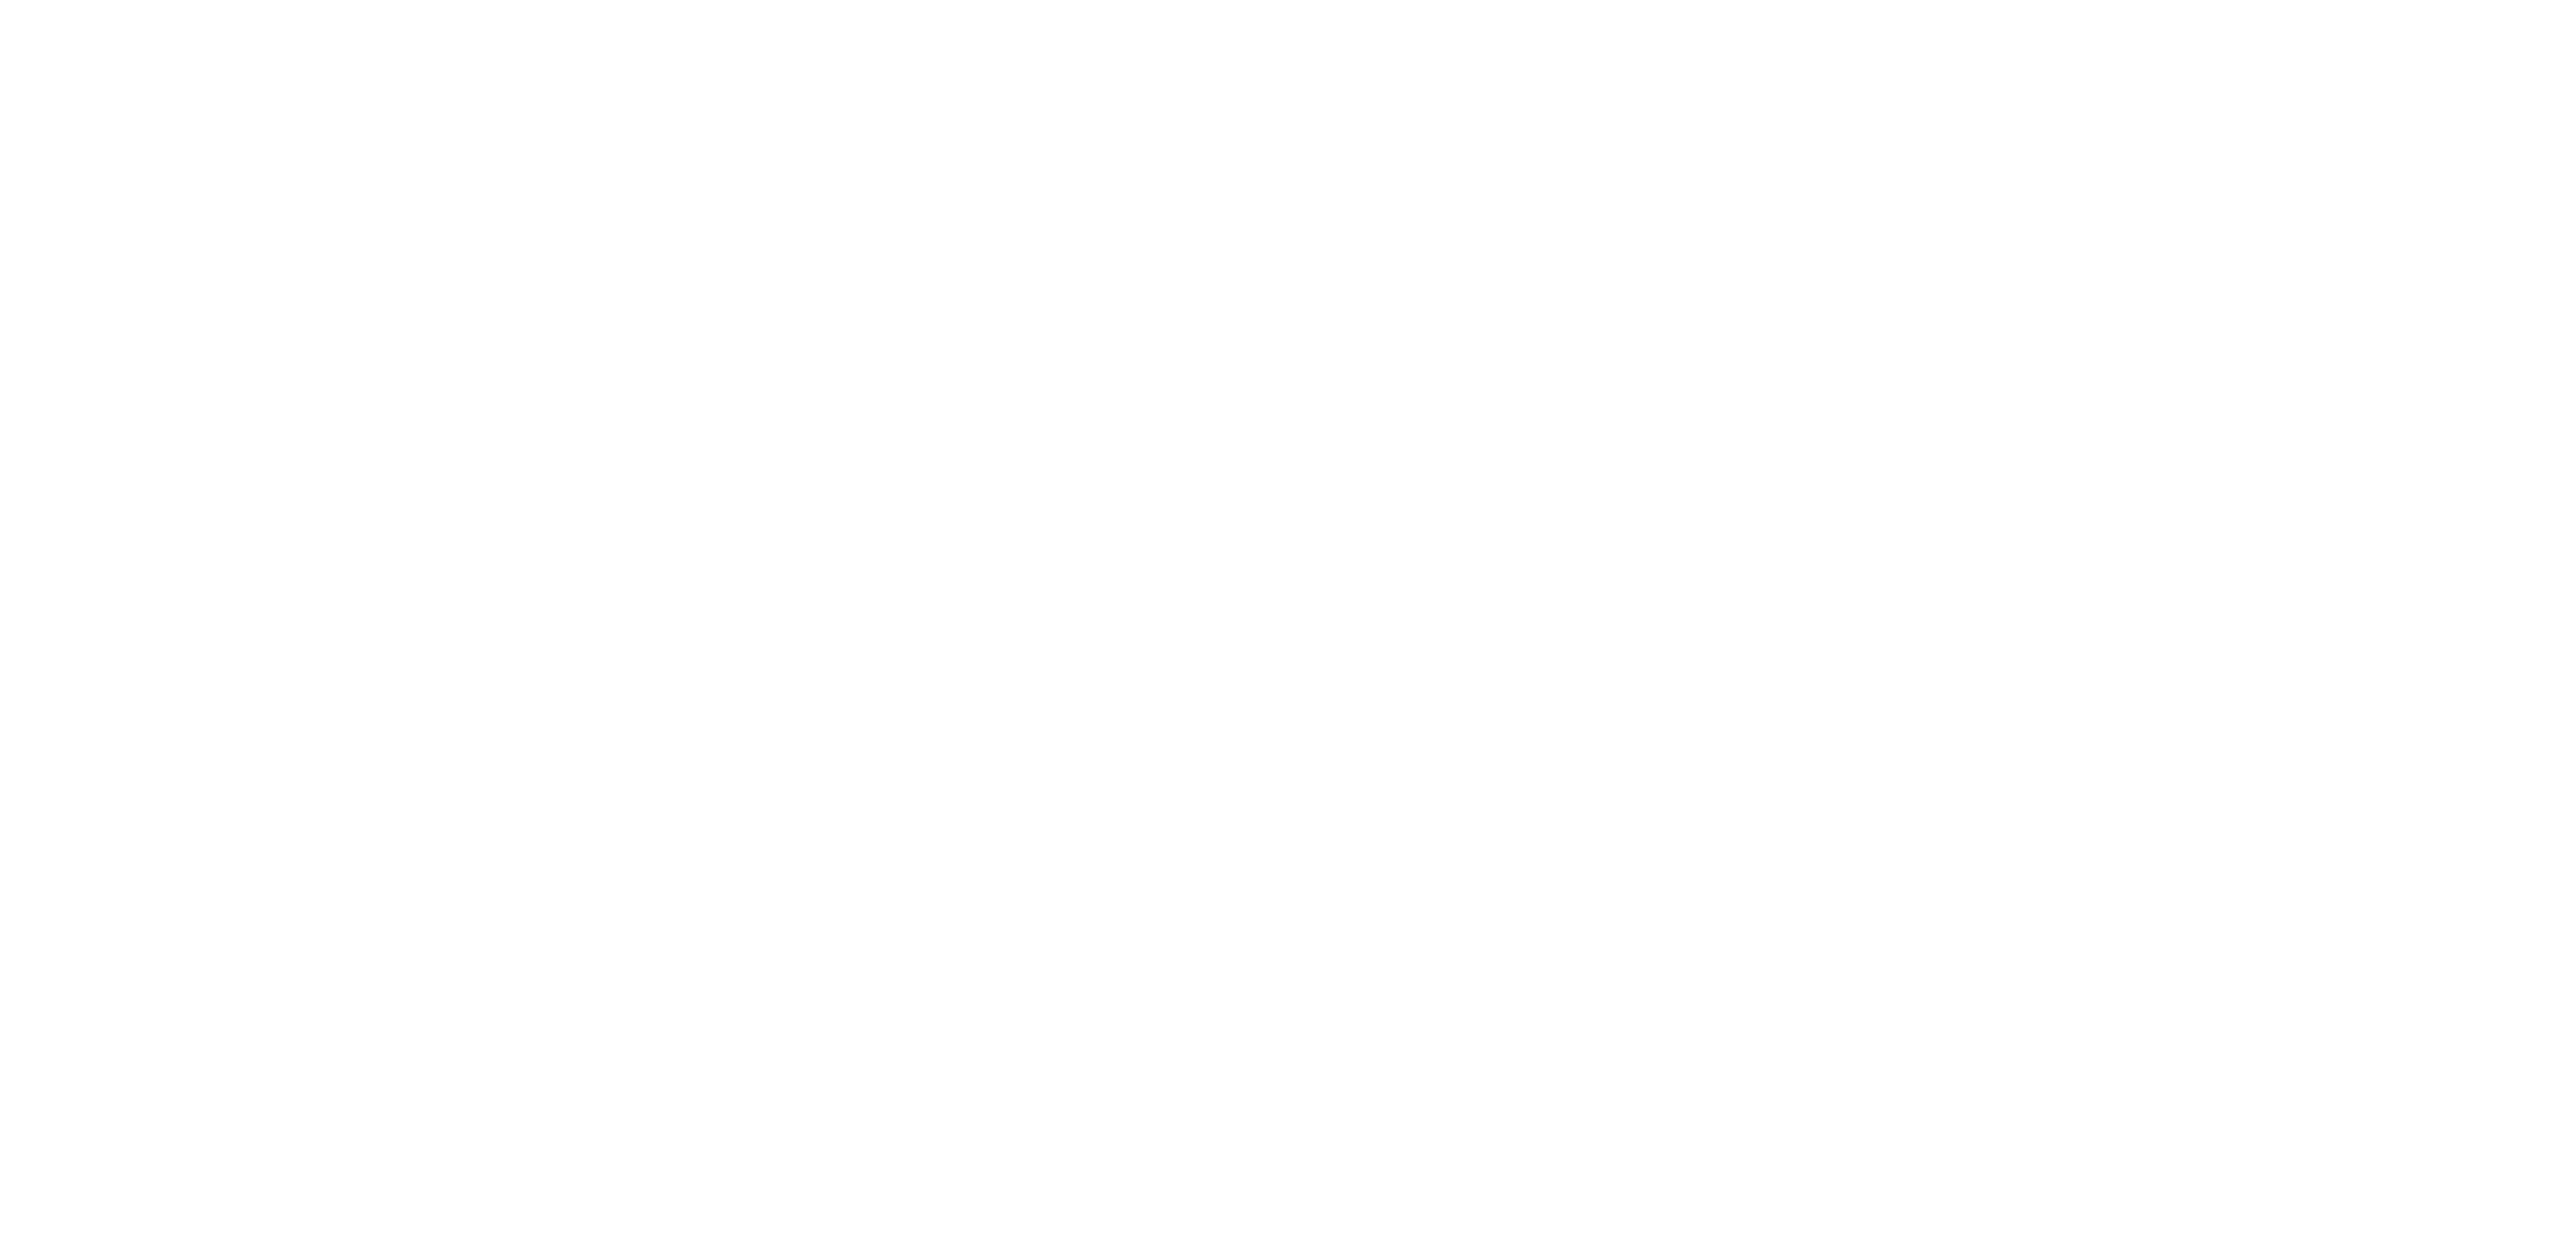 Relax Collective